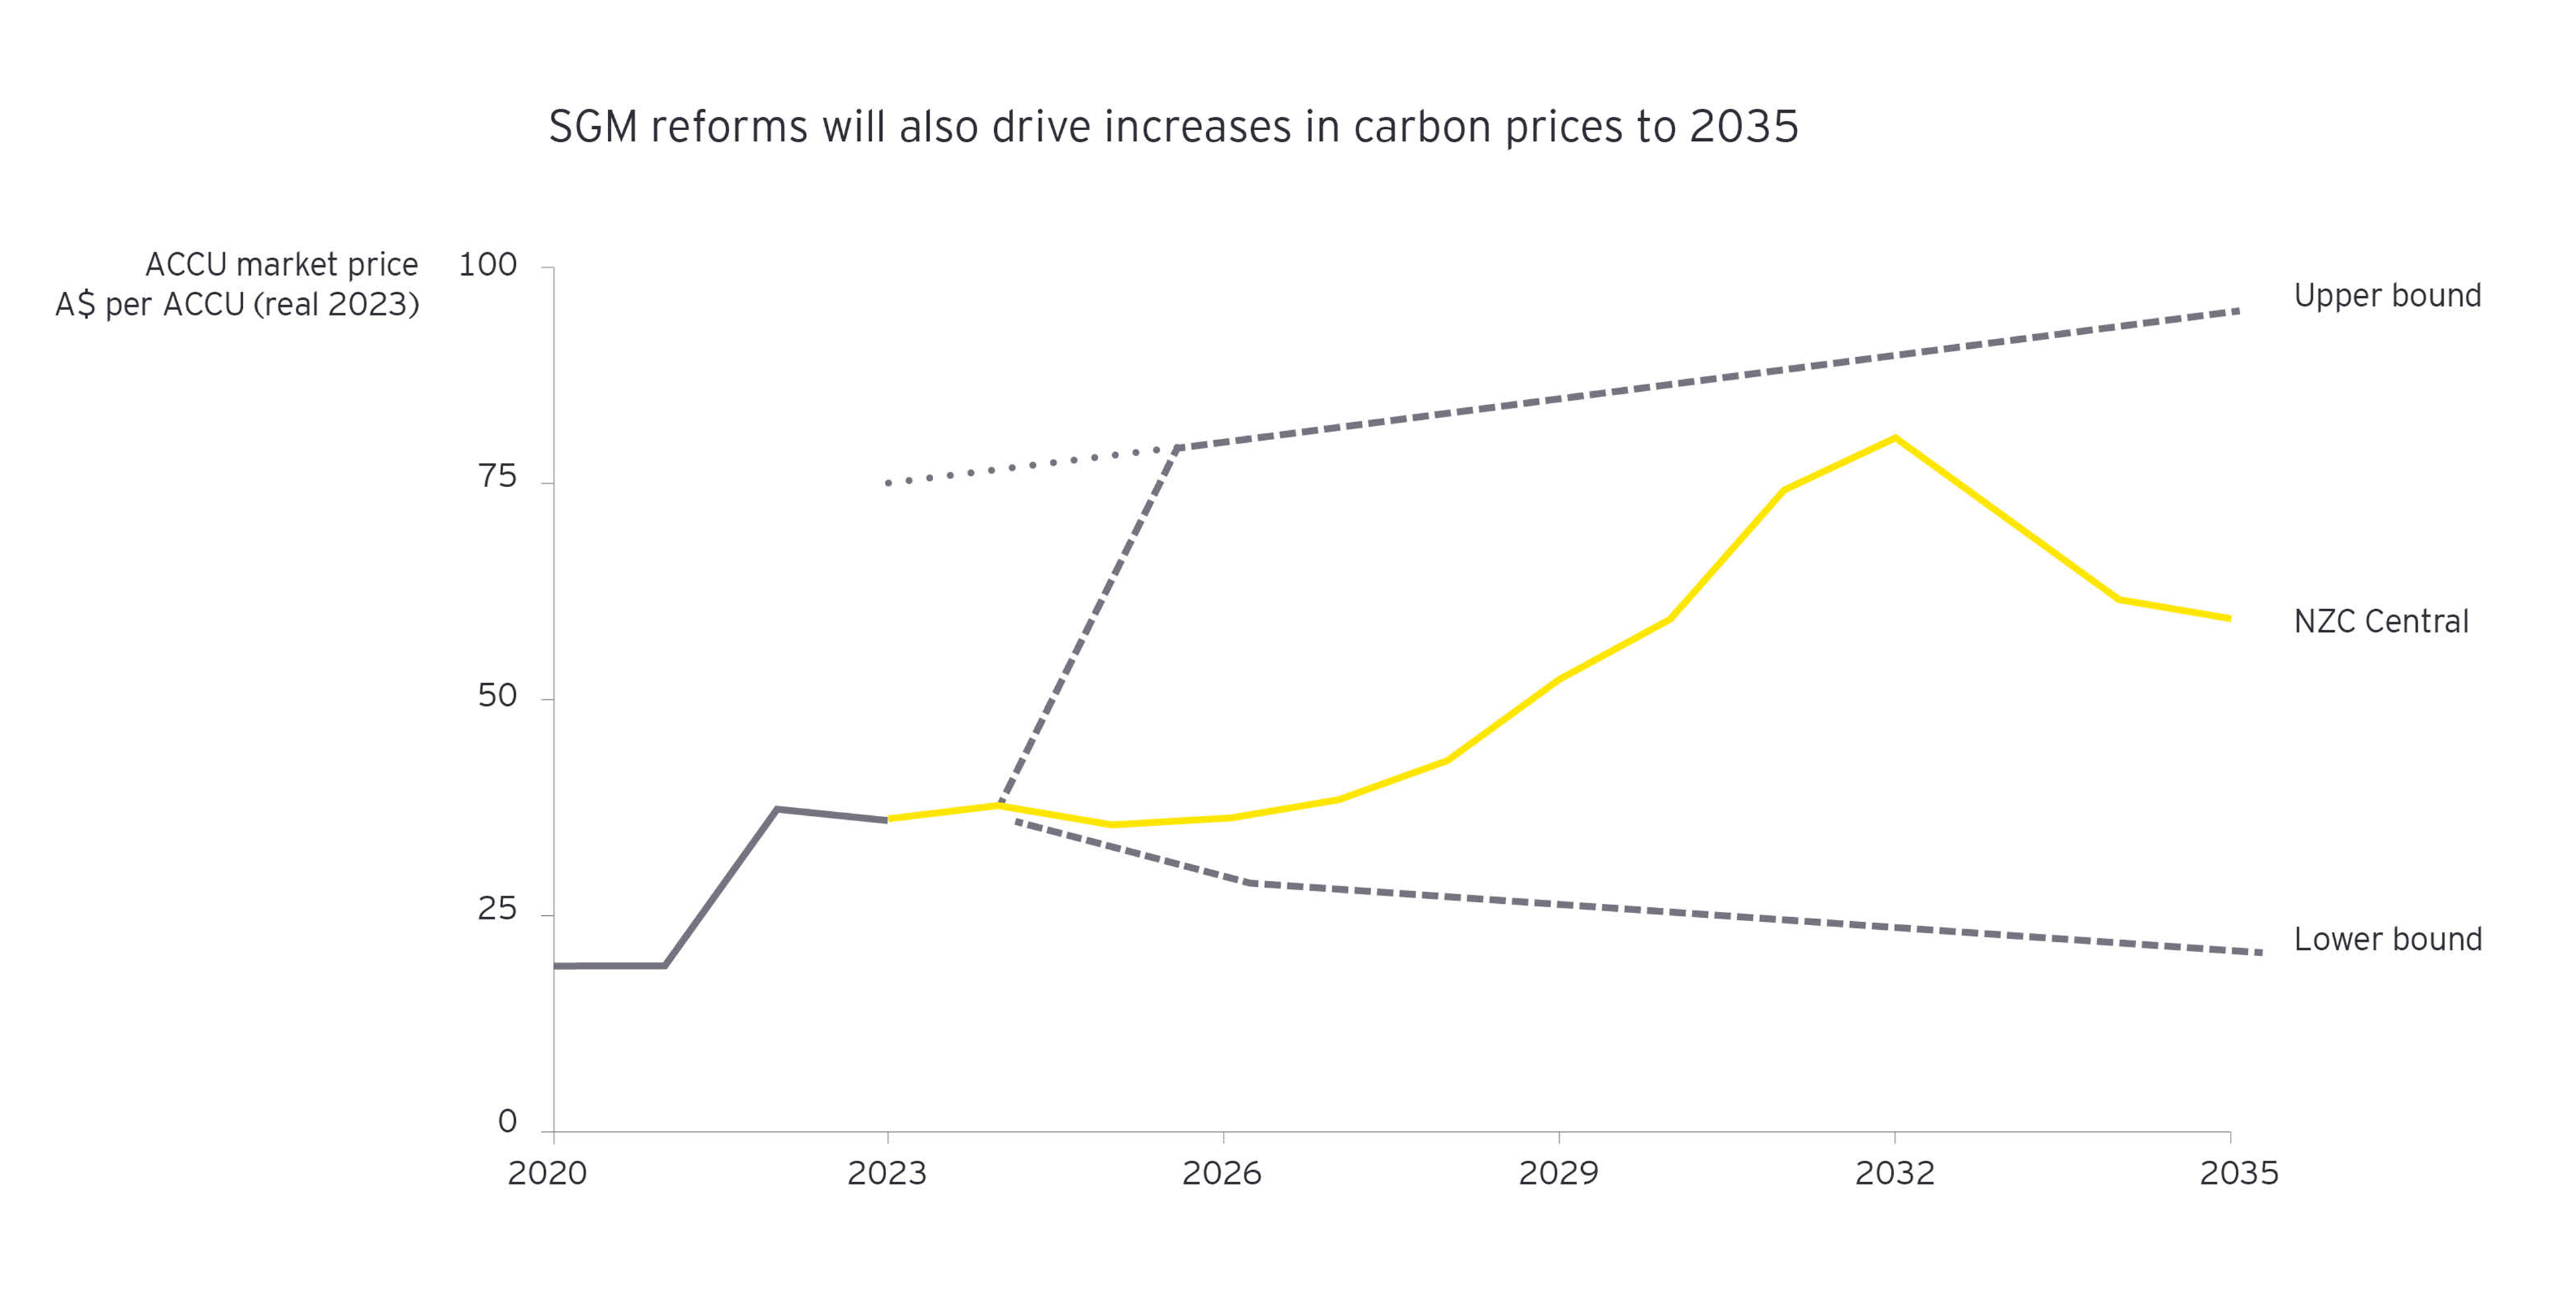 SGM reforms will also drive increases in carbon prices to 2035